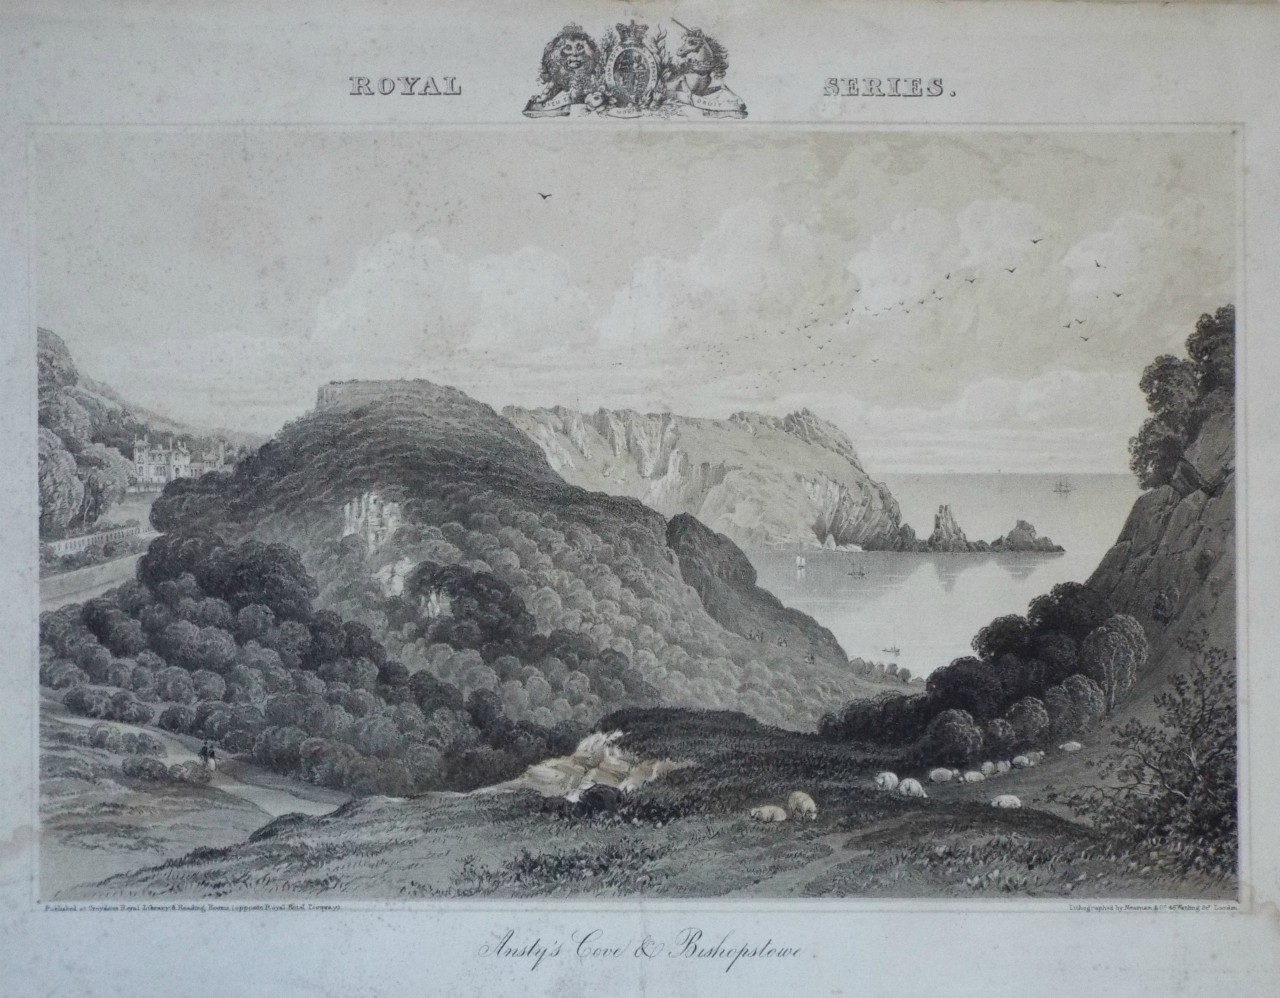 Lithograph - Ansty's Cove & Bishopstowe. Royal Series. - Newman